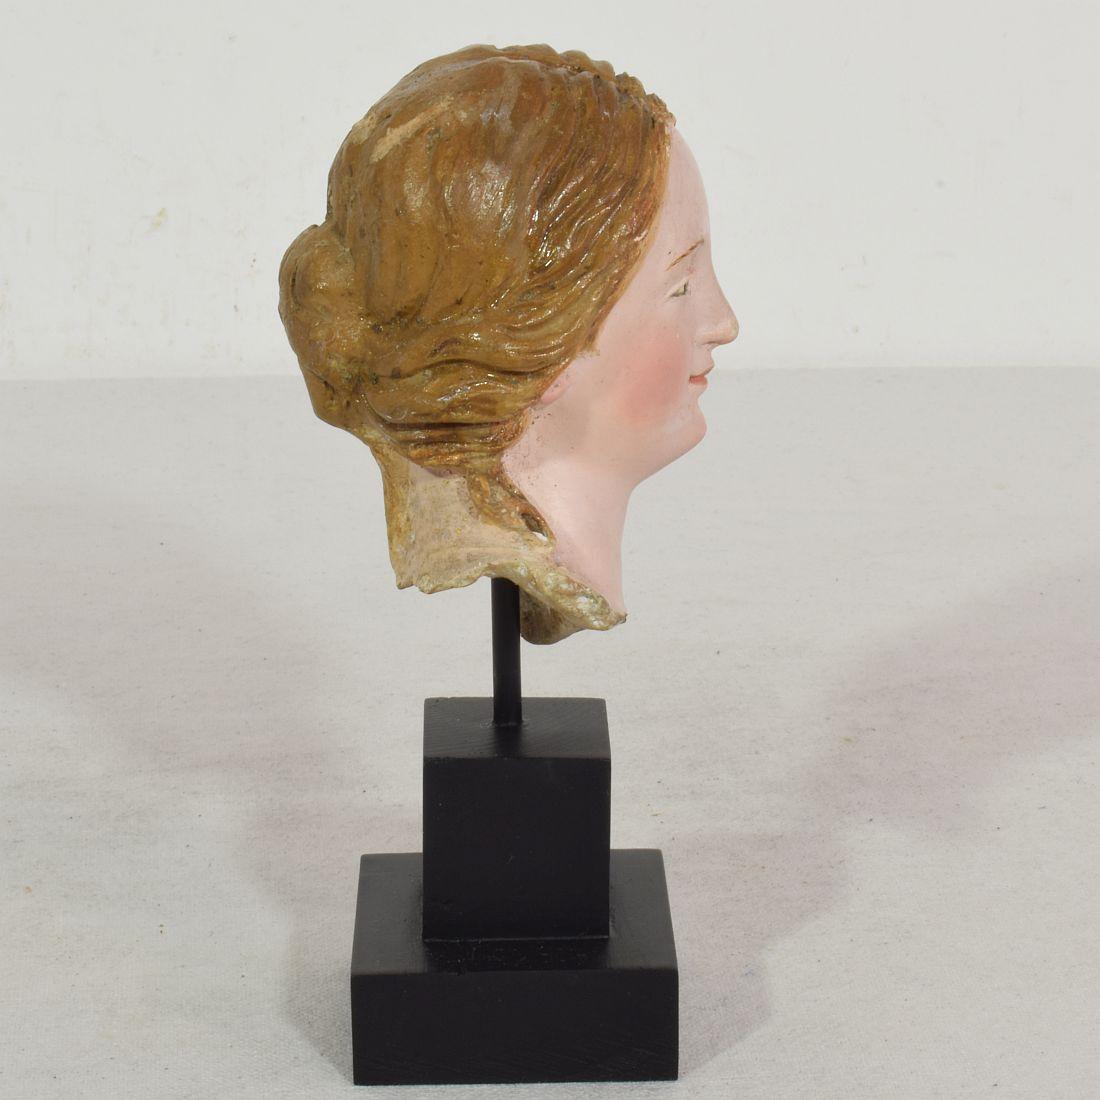 Hand-Crafted Small 18th Century Italian / Neapolitan Terracotta Head of a Madonna